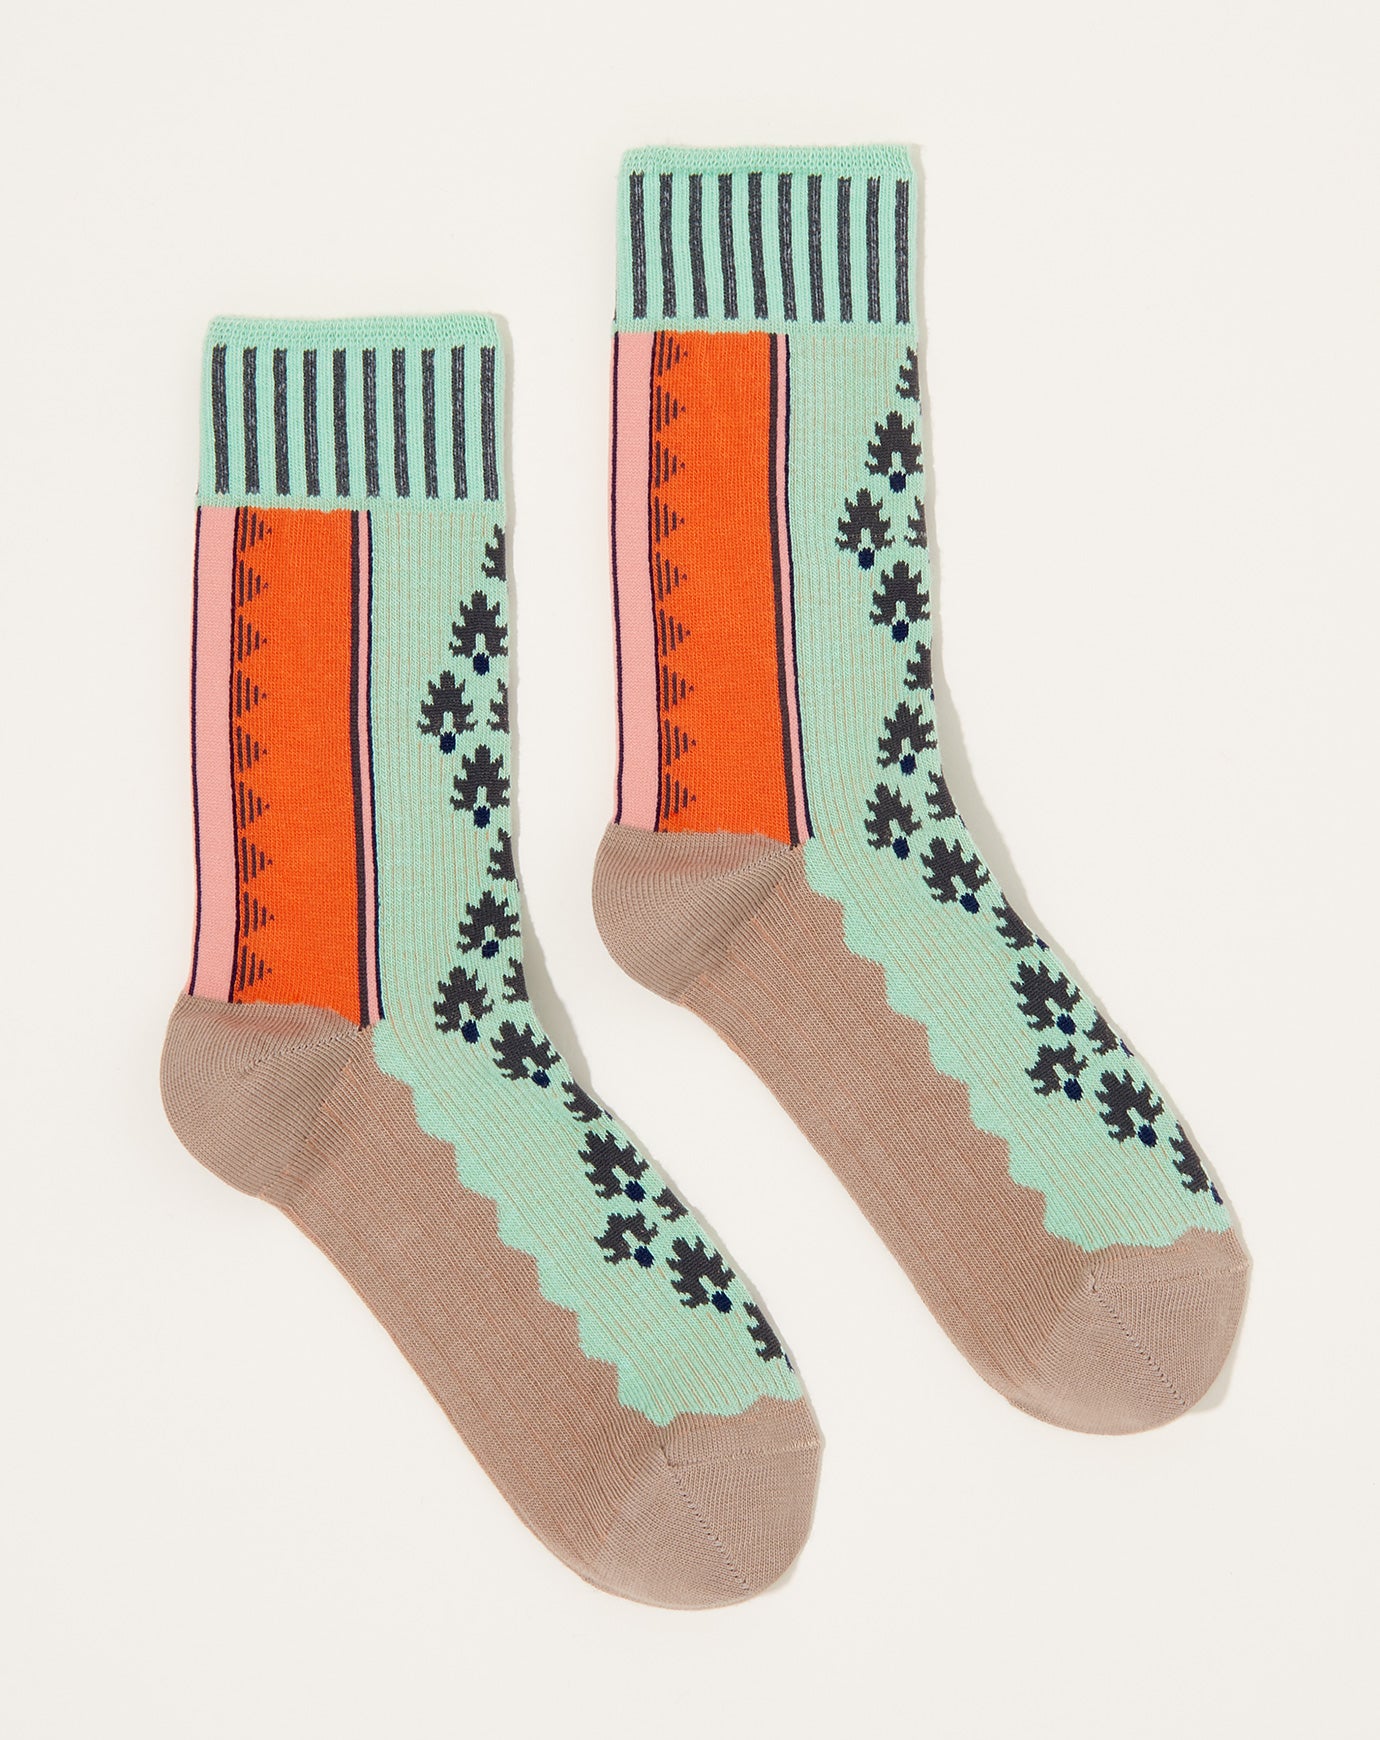 Exquisite J ‘OLD WALL PAPER PINE CONES’ Socks in Mint